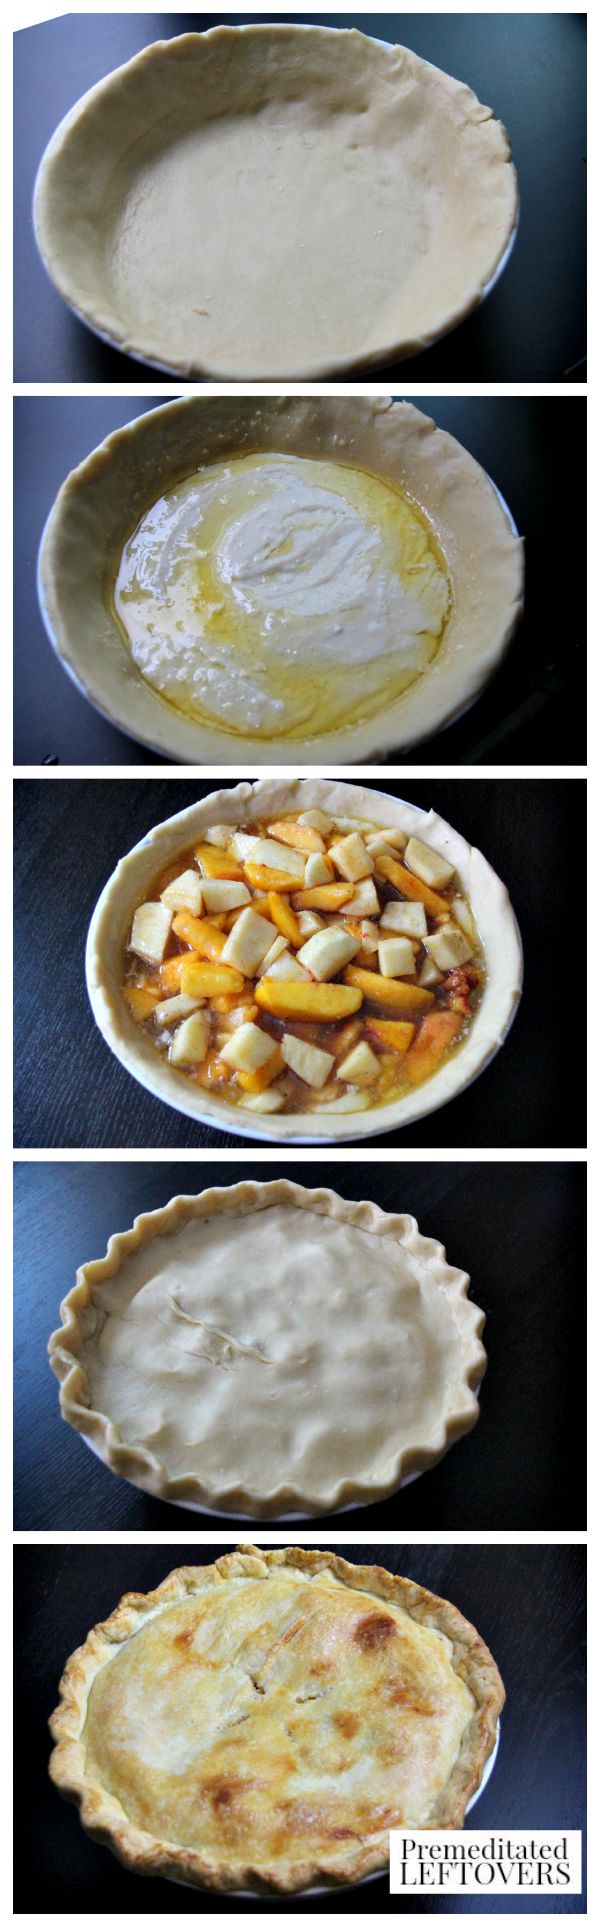 How to Make a Peach and Apple Cobbler Pie - Process